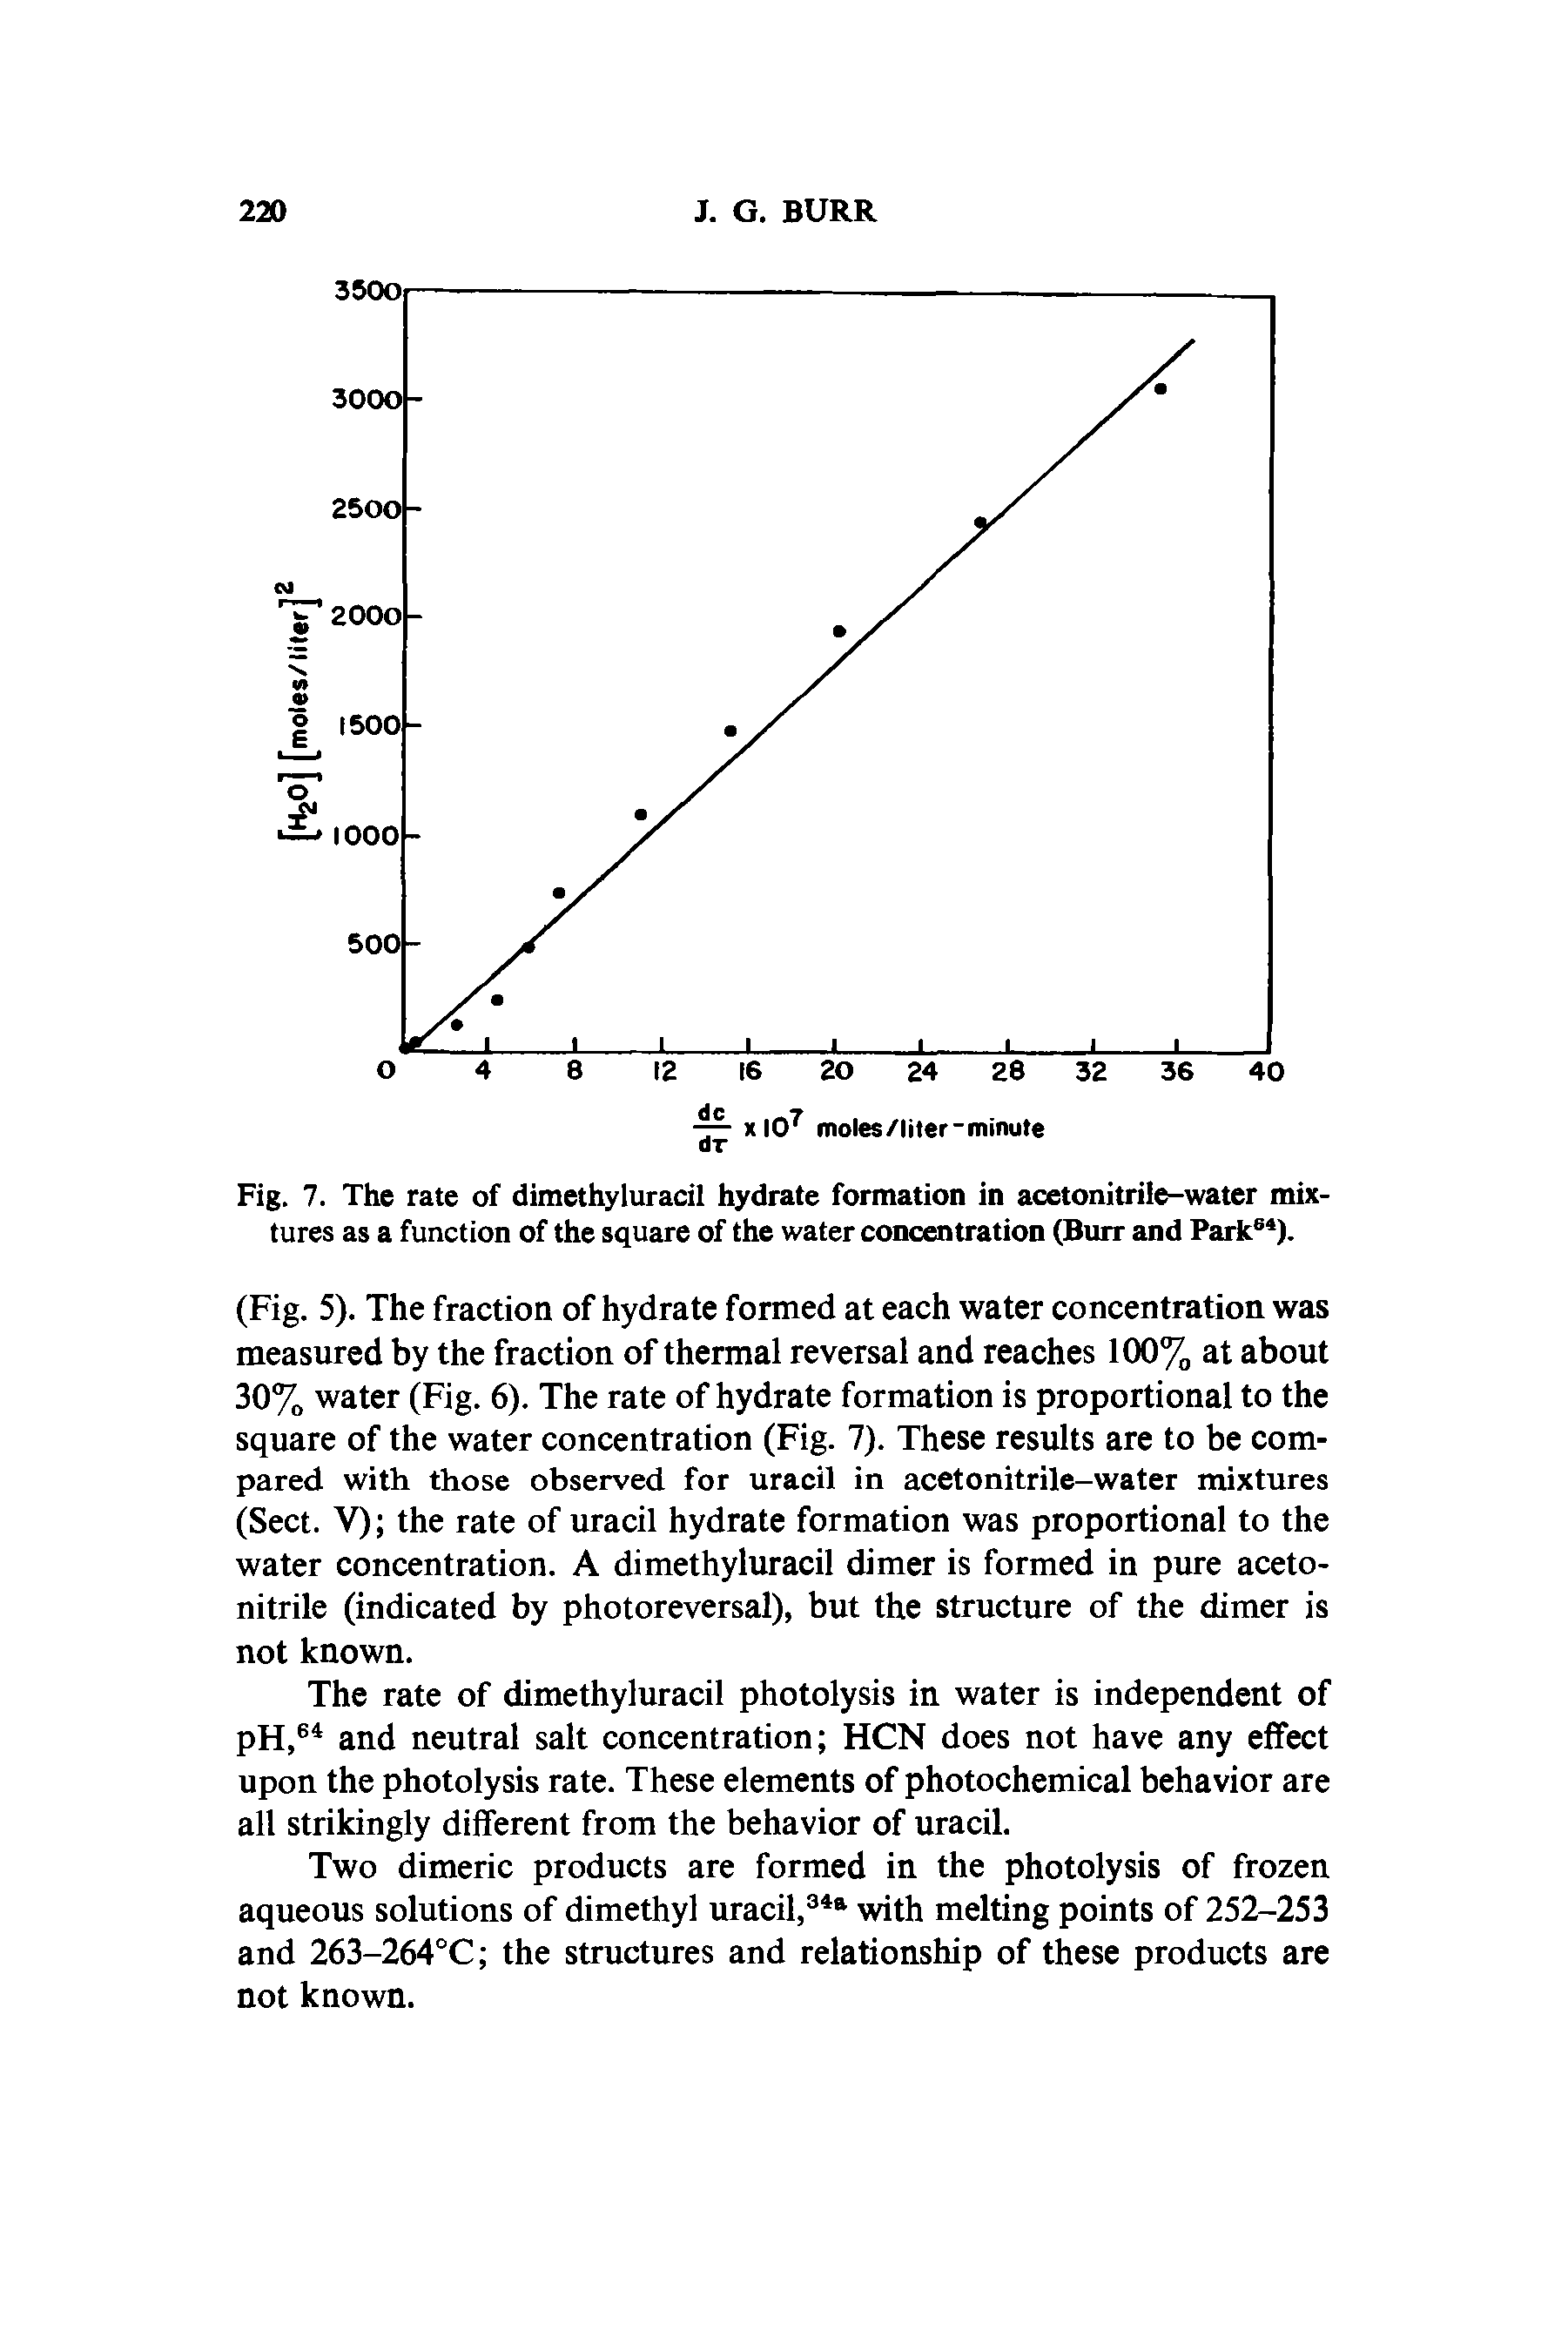 Fig. 7. The rate of dimethyluracil hydrate formation in acetonitrile-water mixtures as a function of the square of the water concentration (Burr and Park64).